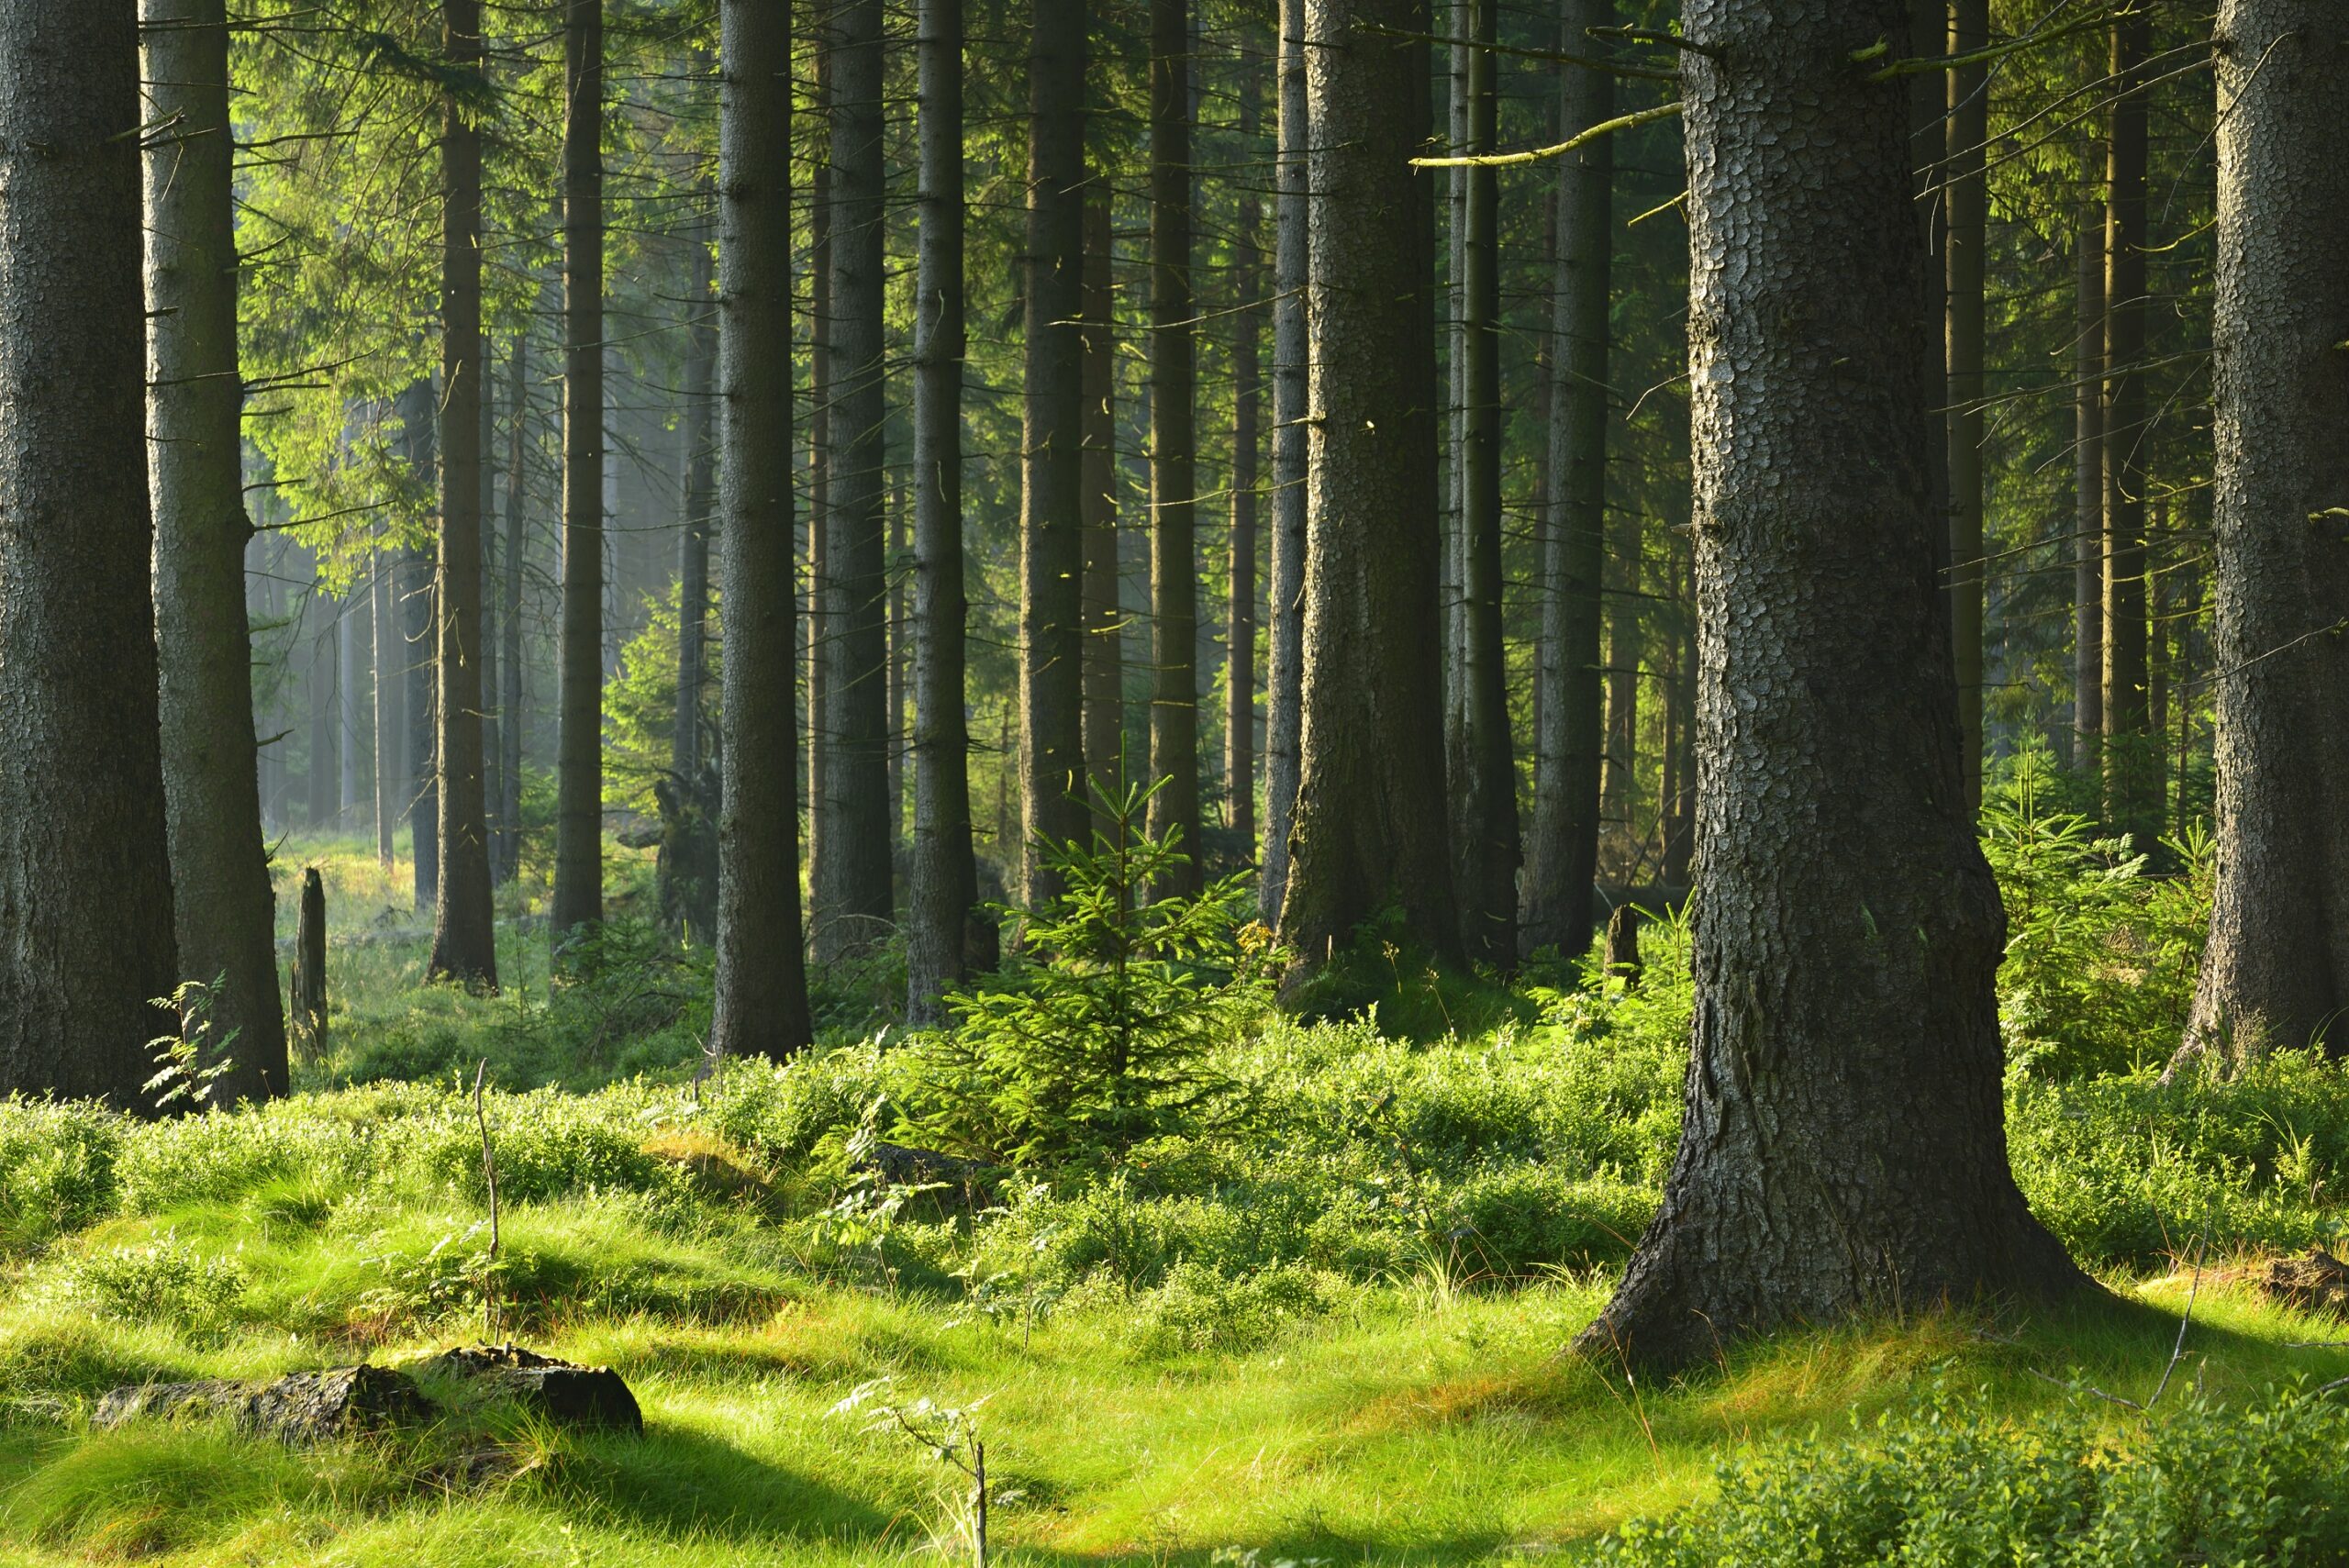 In addition to absorbing CO2, forests would help cool the planet